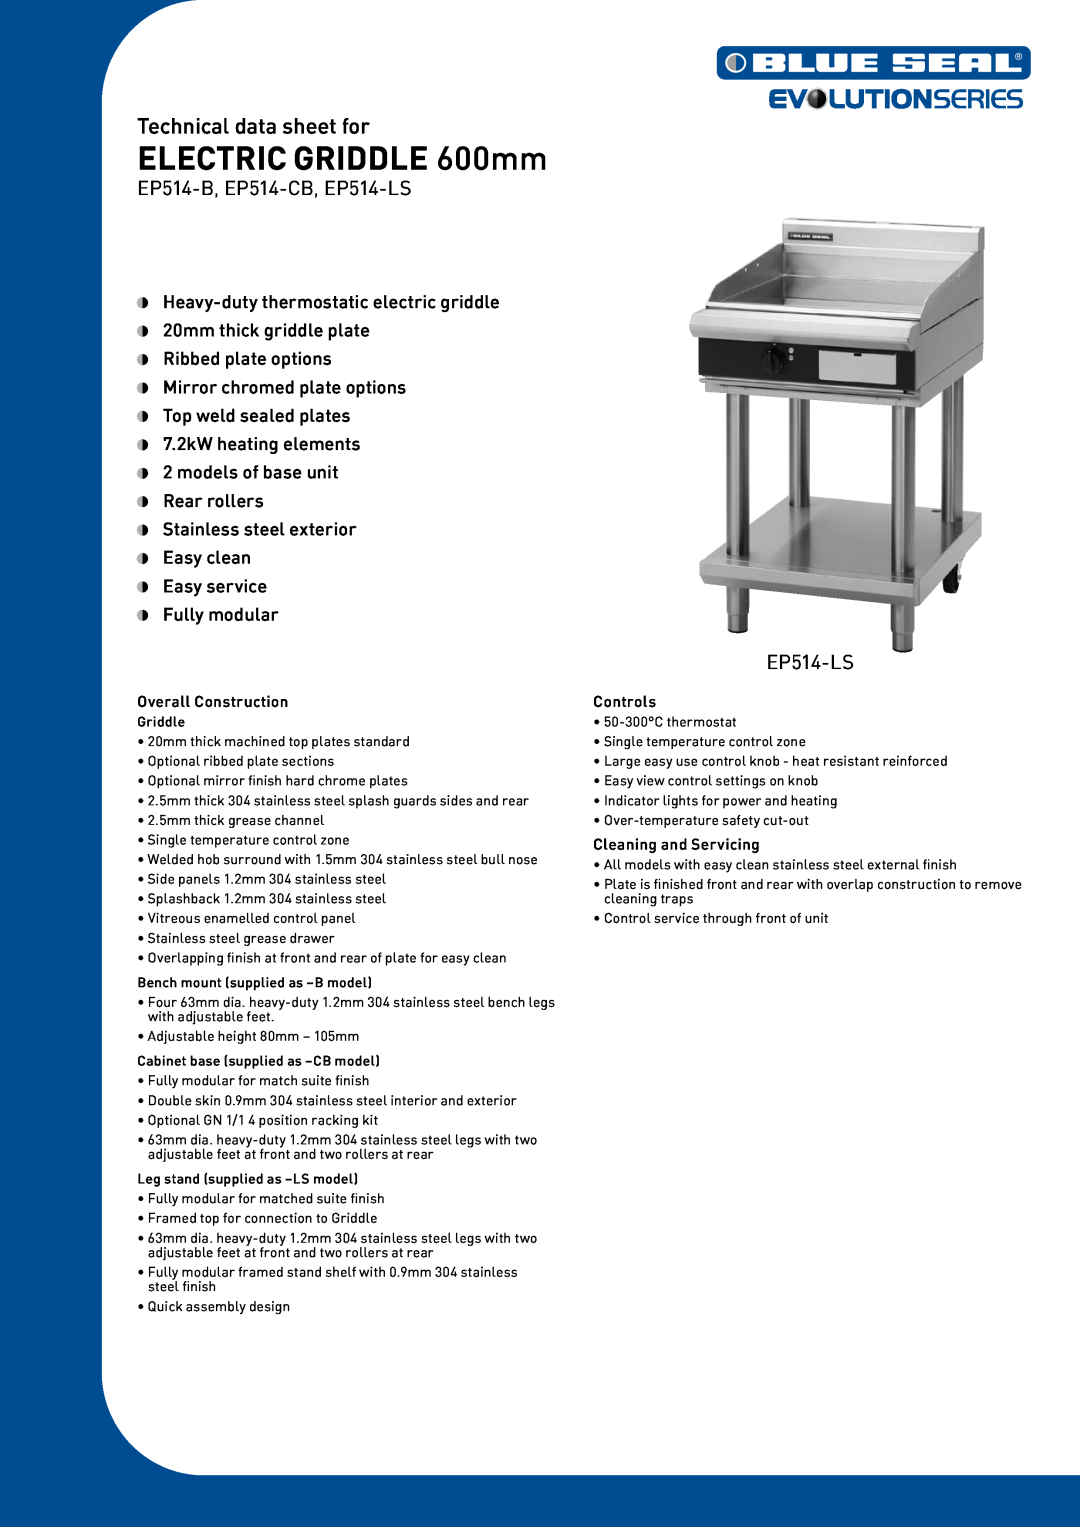 Moffat manual ELECTRIC GRIDDLE 600mm, Technical data sheet for, EP514-B, EP514-CB, EP514-LS 